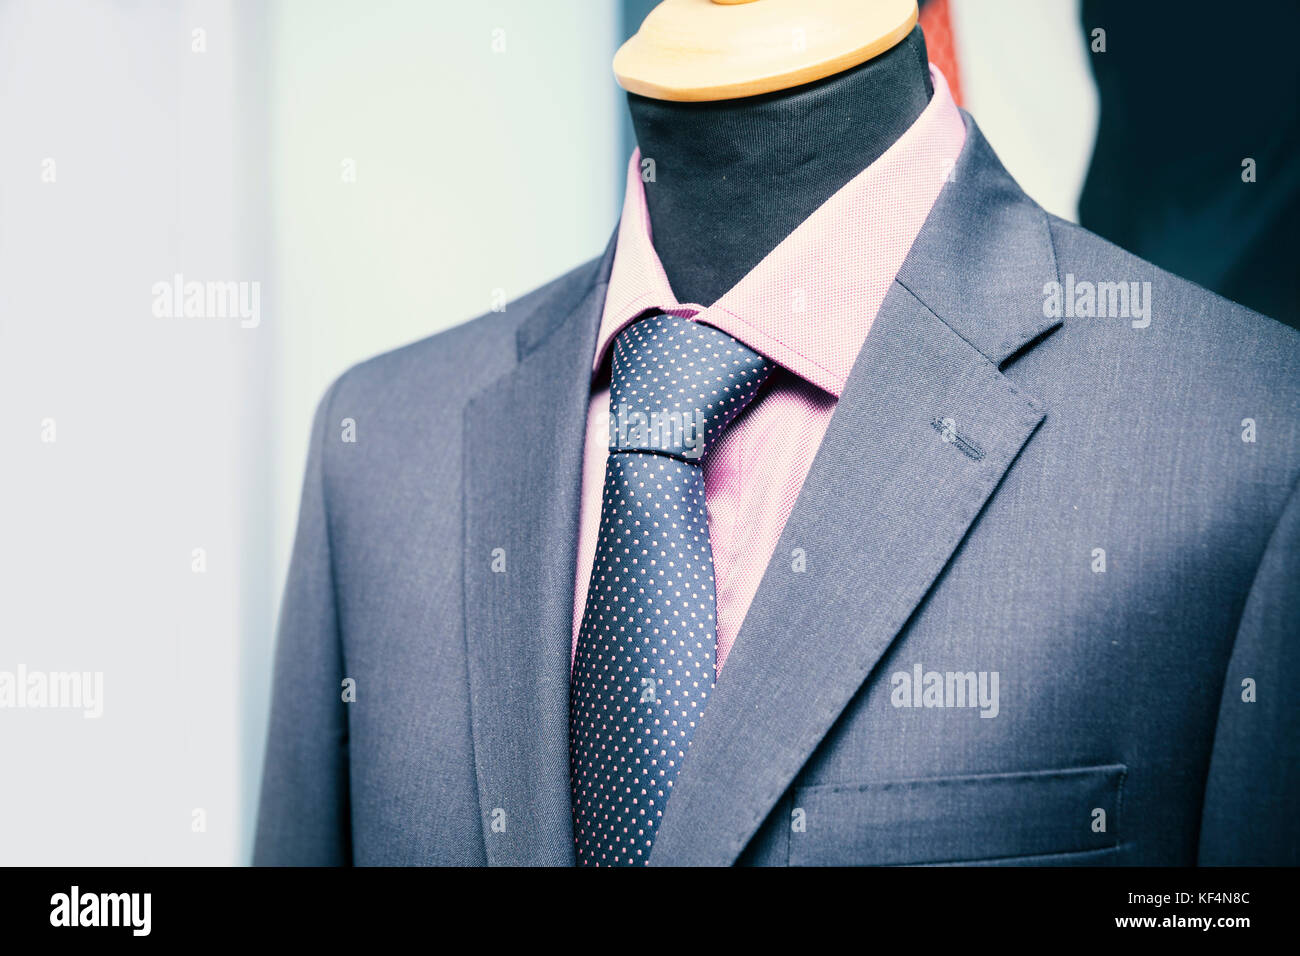 shirt tie and suit jacket on a mannequin, close up Stock Photo